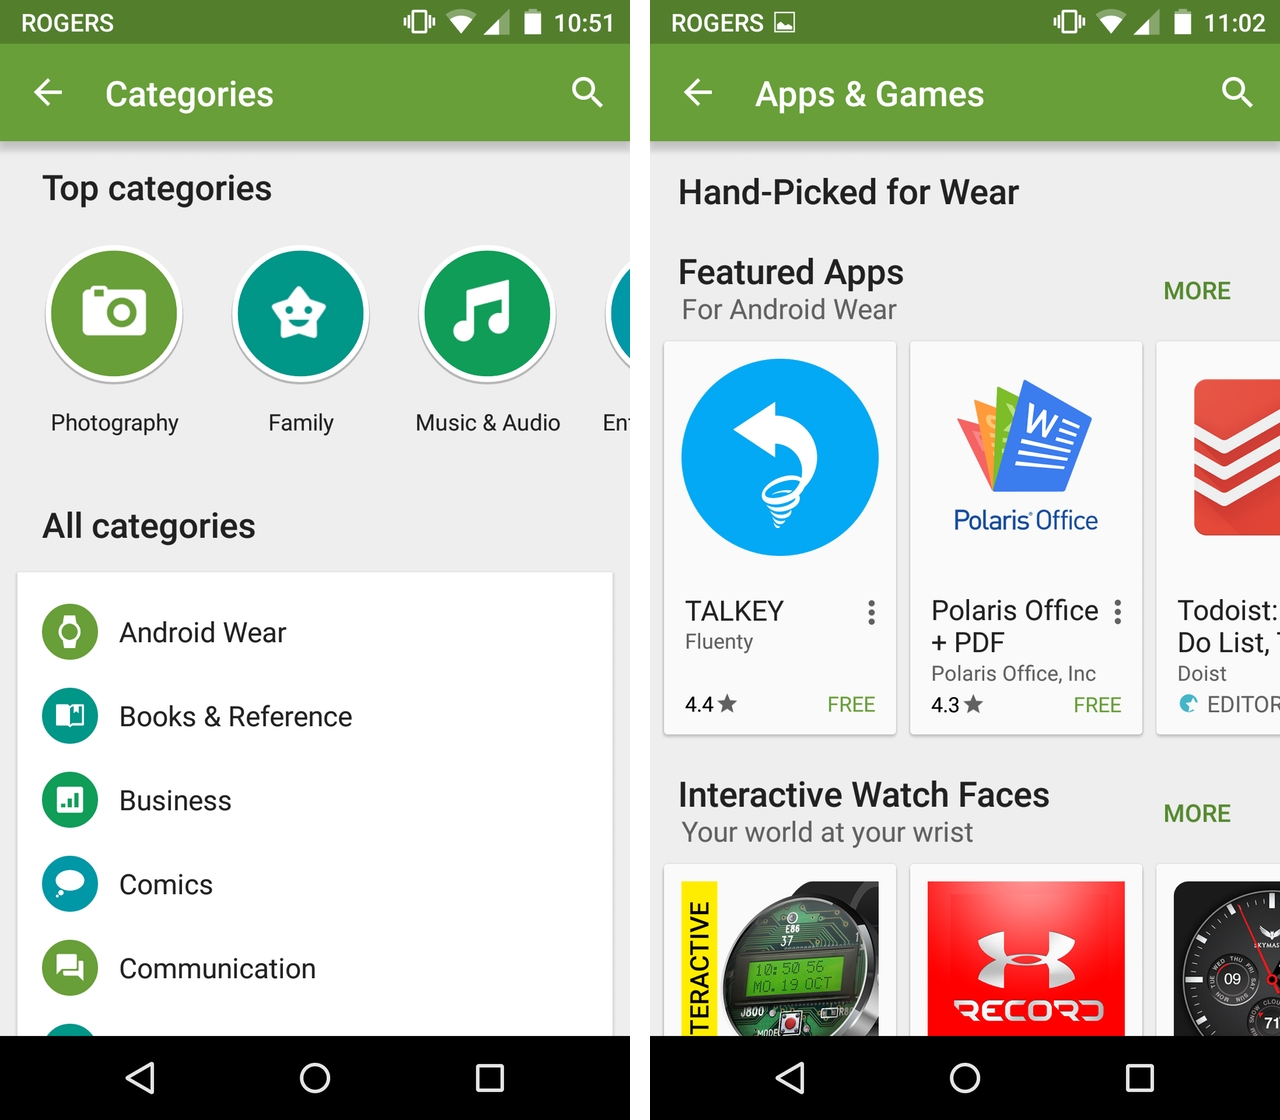 Google Play Redesign